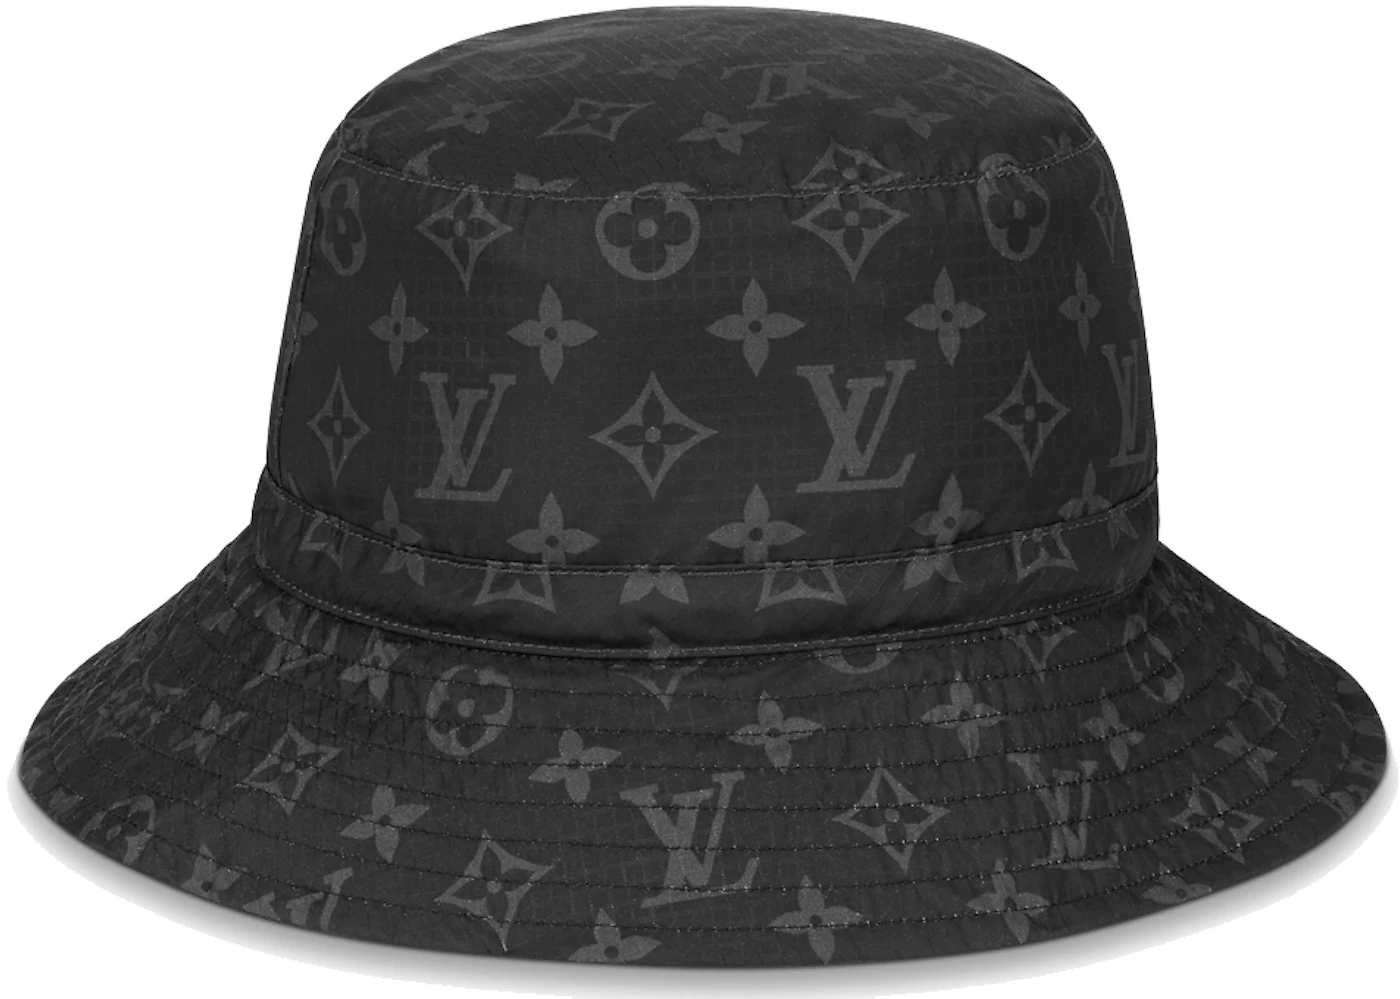 Louis Vuitton Bucket Hat M Size Monogram Nylon Made in Italy Rare Limited  8304AK